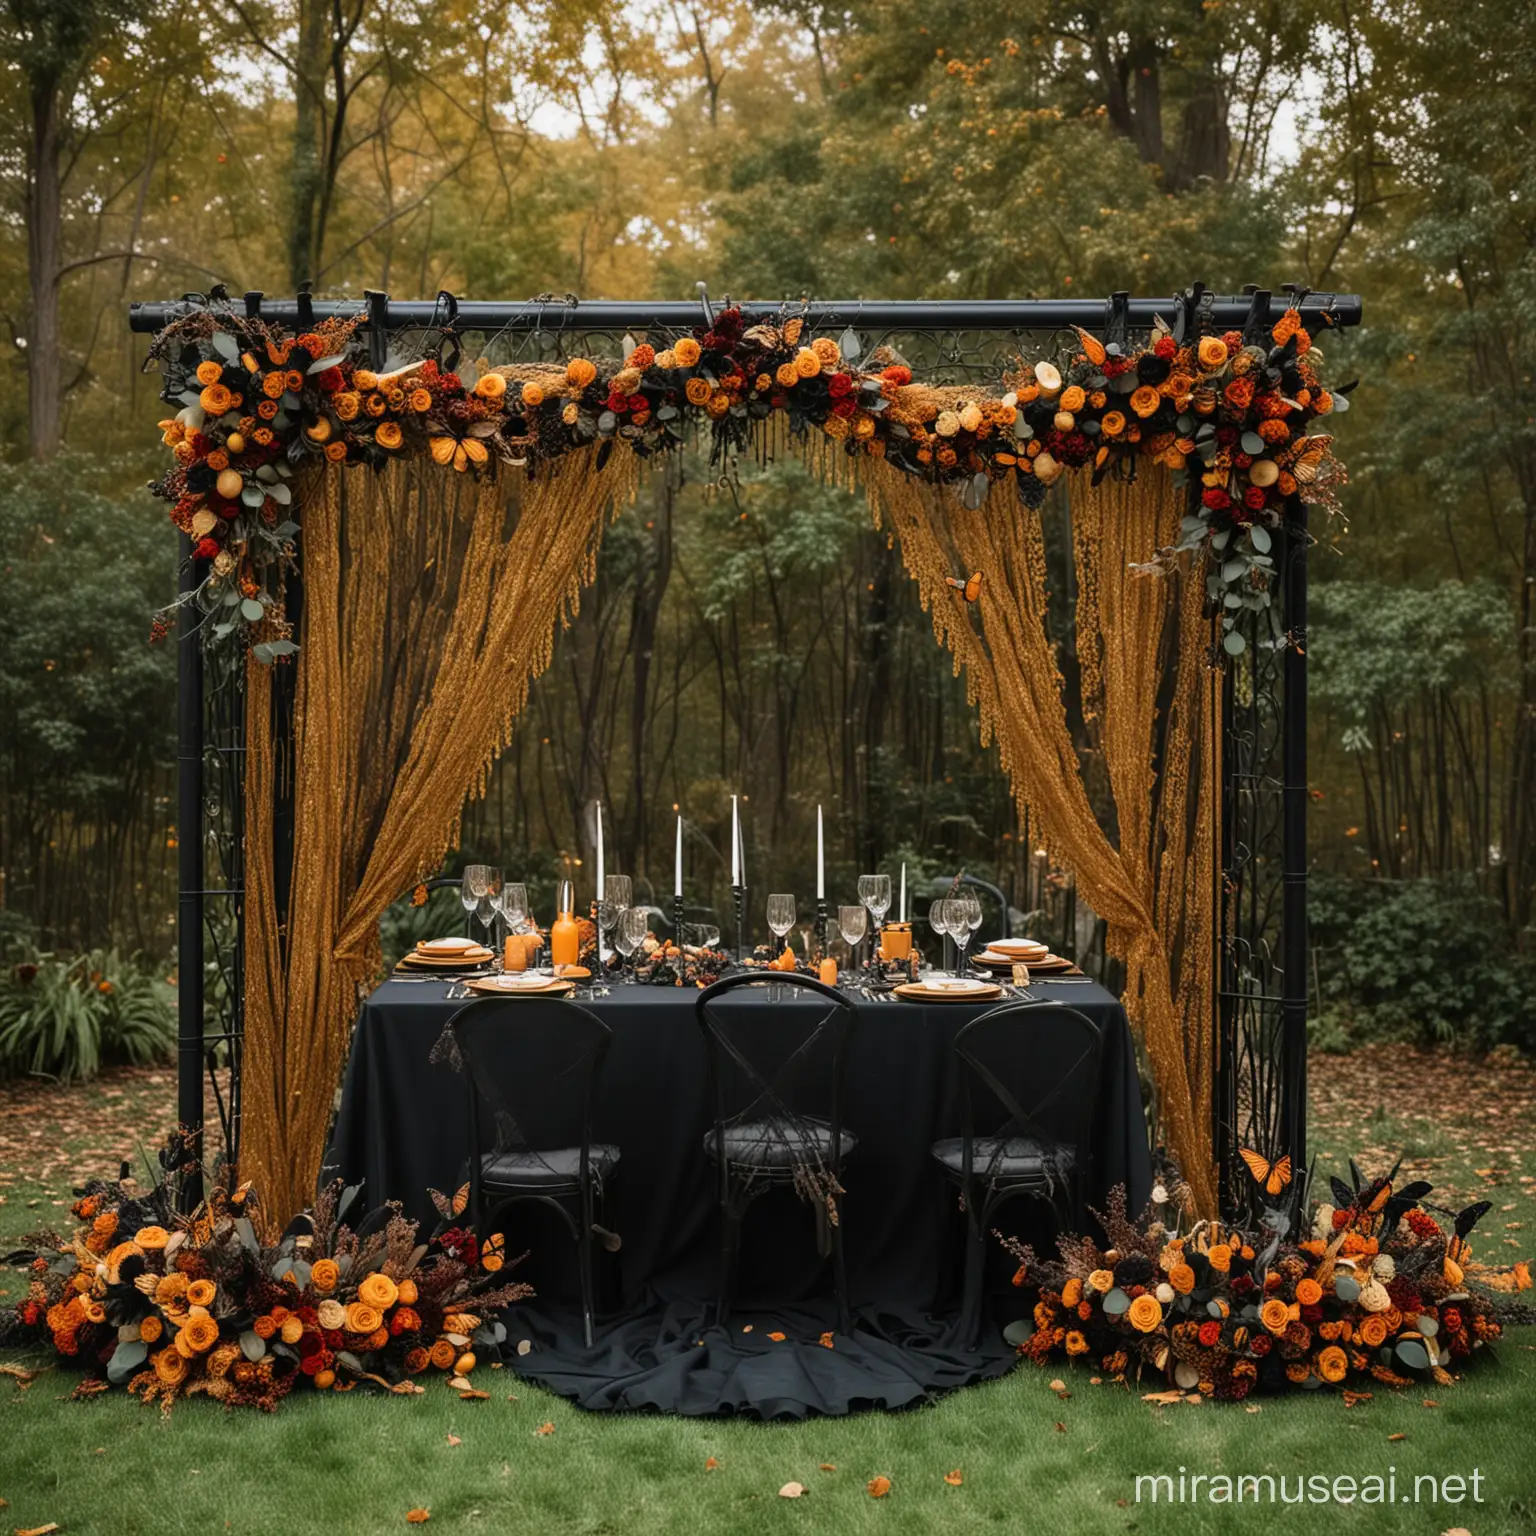 Backyard Wedding set up, autumn, gothic, airy, cozy, black and gold color scheme with monarch butterflies and autumnal accent colors